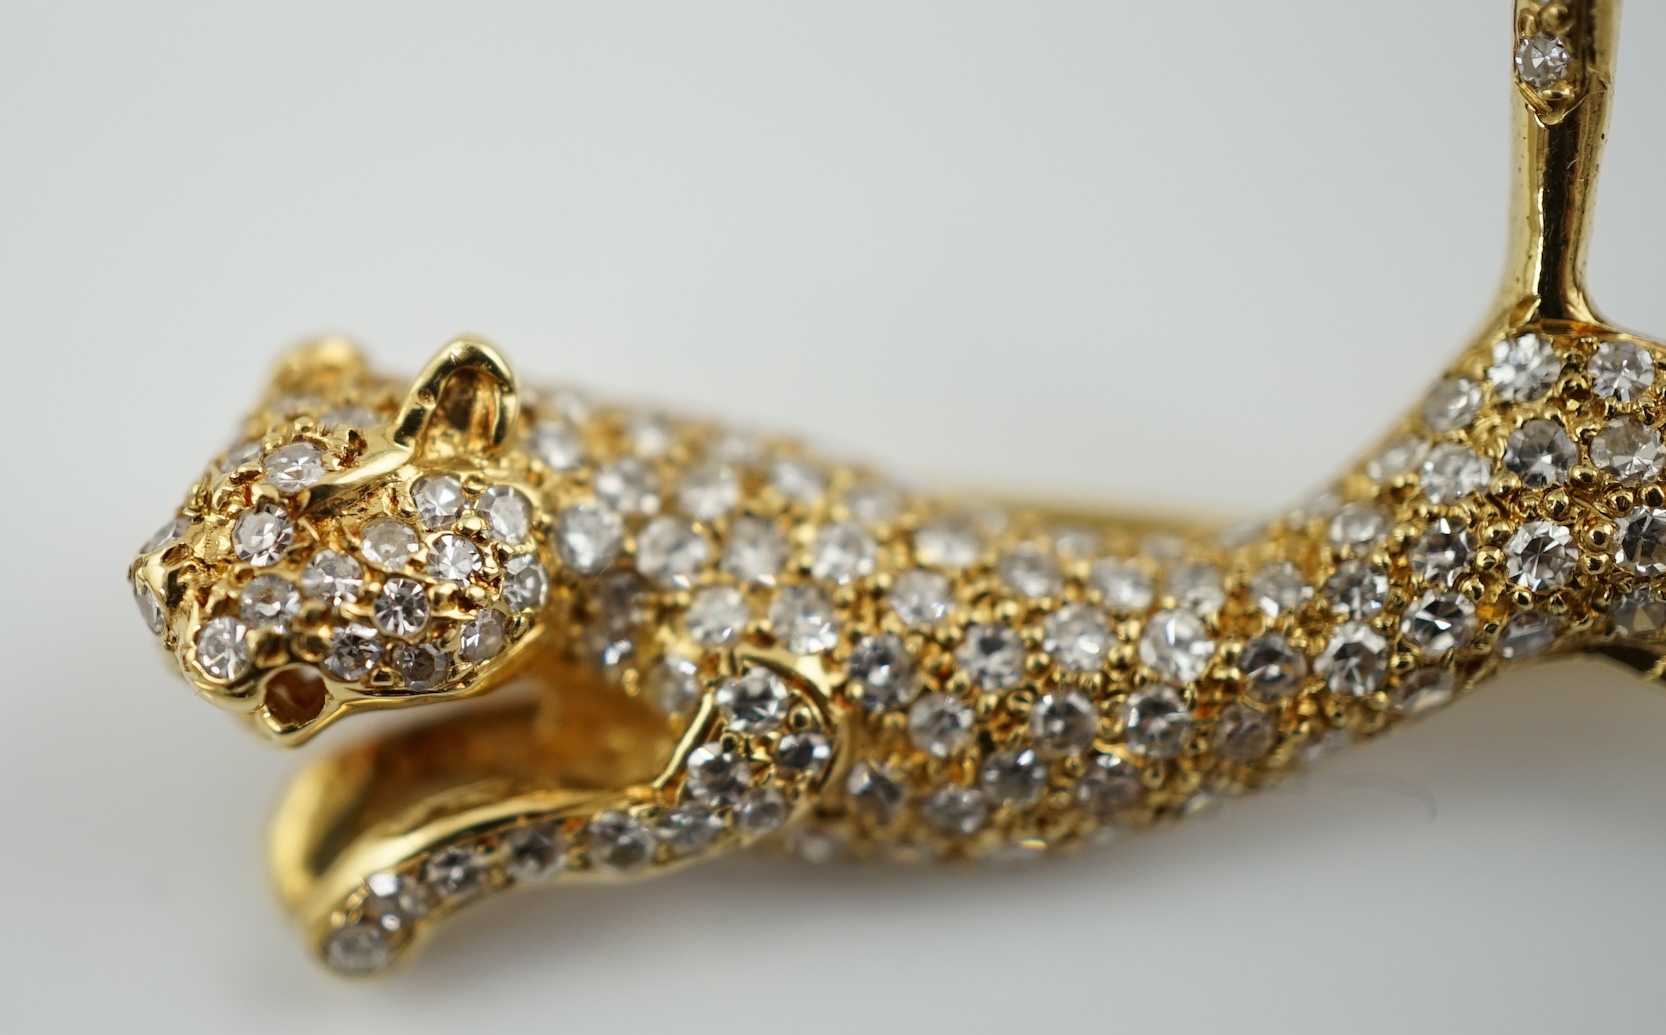 A gold and pave set diamond leaping panther brooch